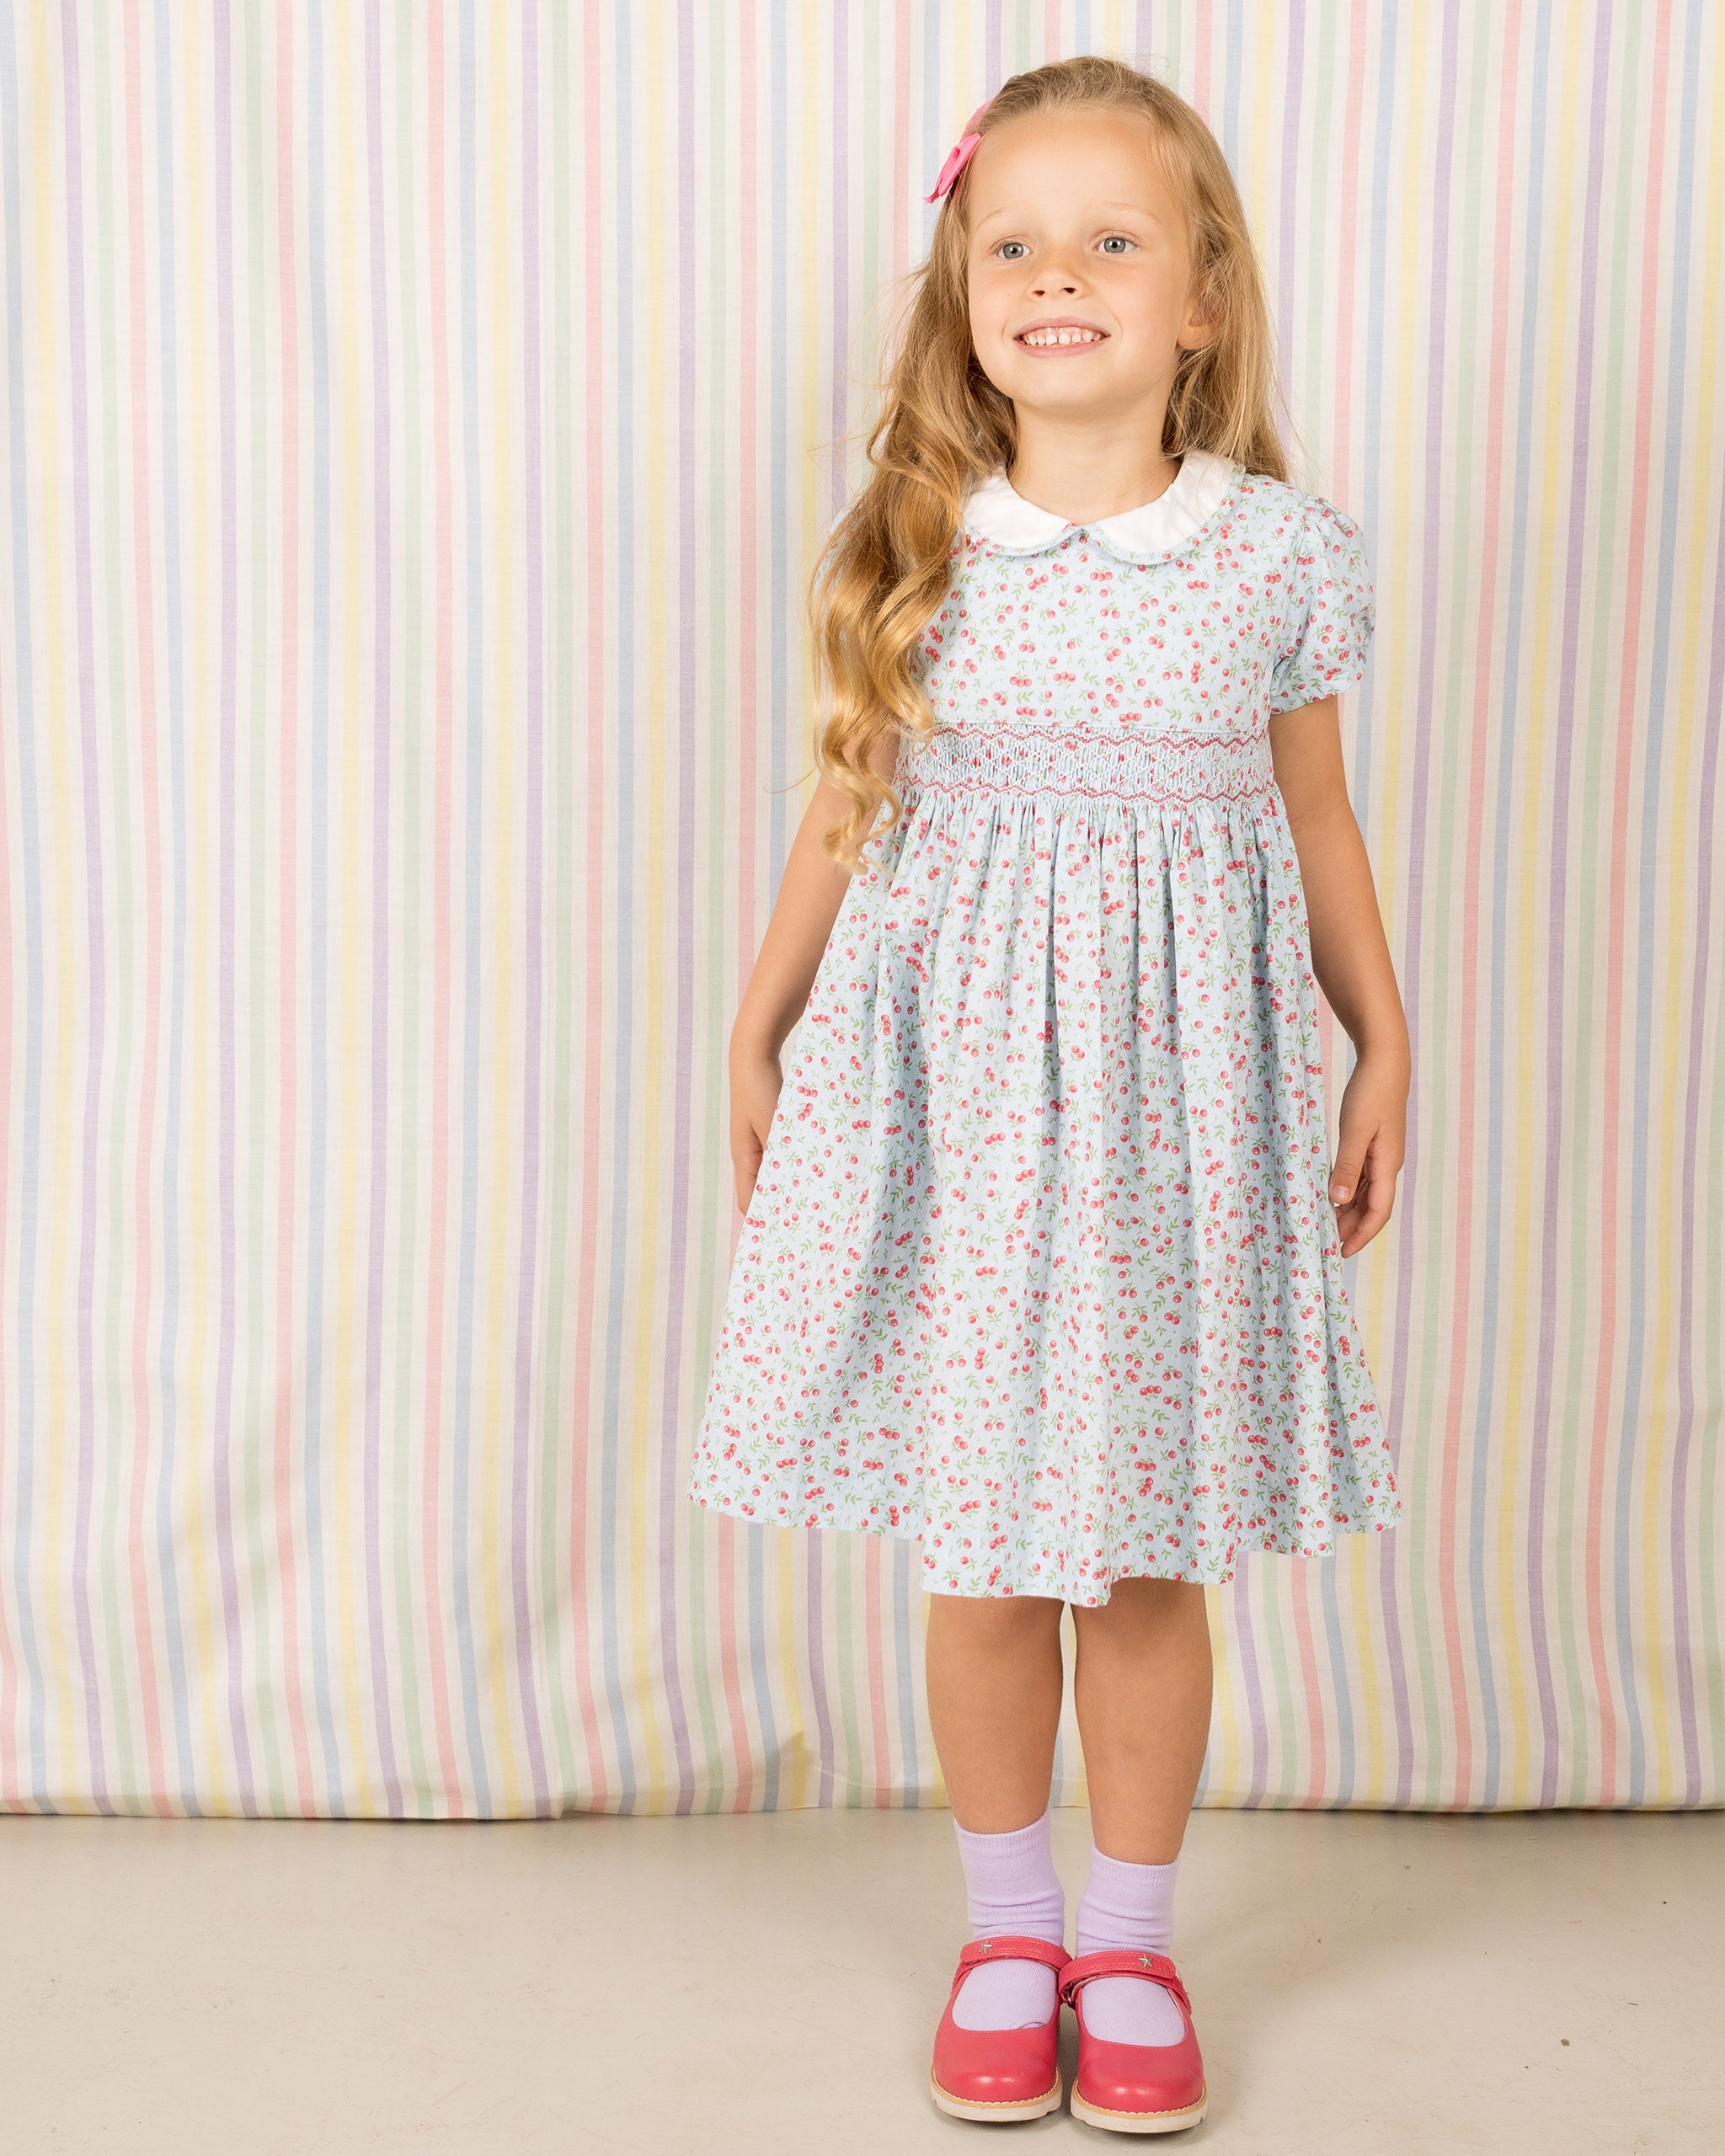 girl in smocked dress, cherry print and white collar